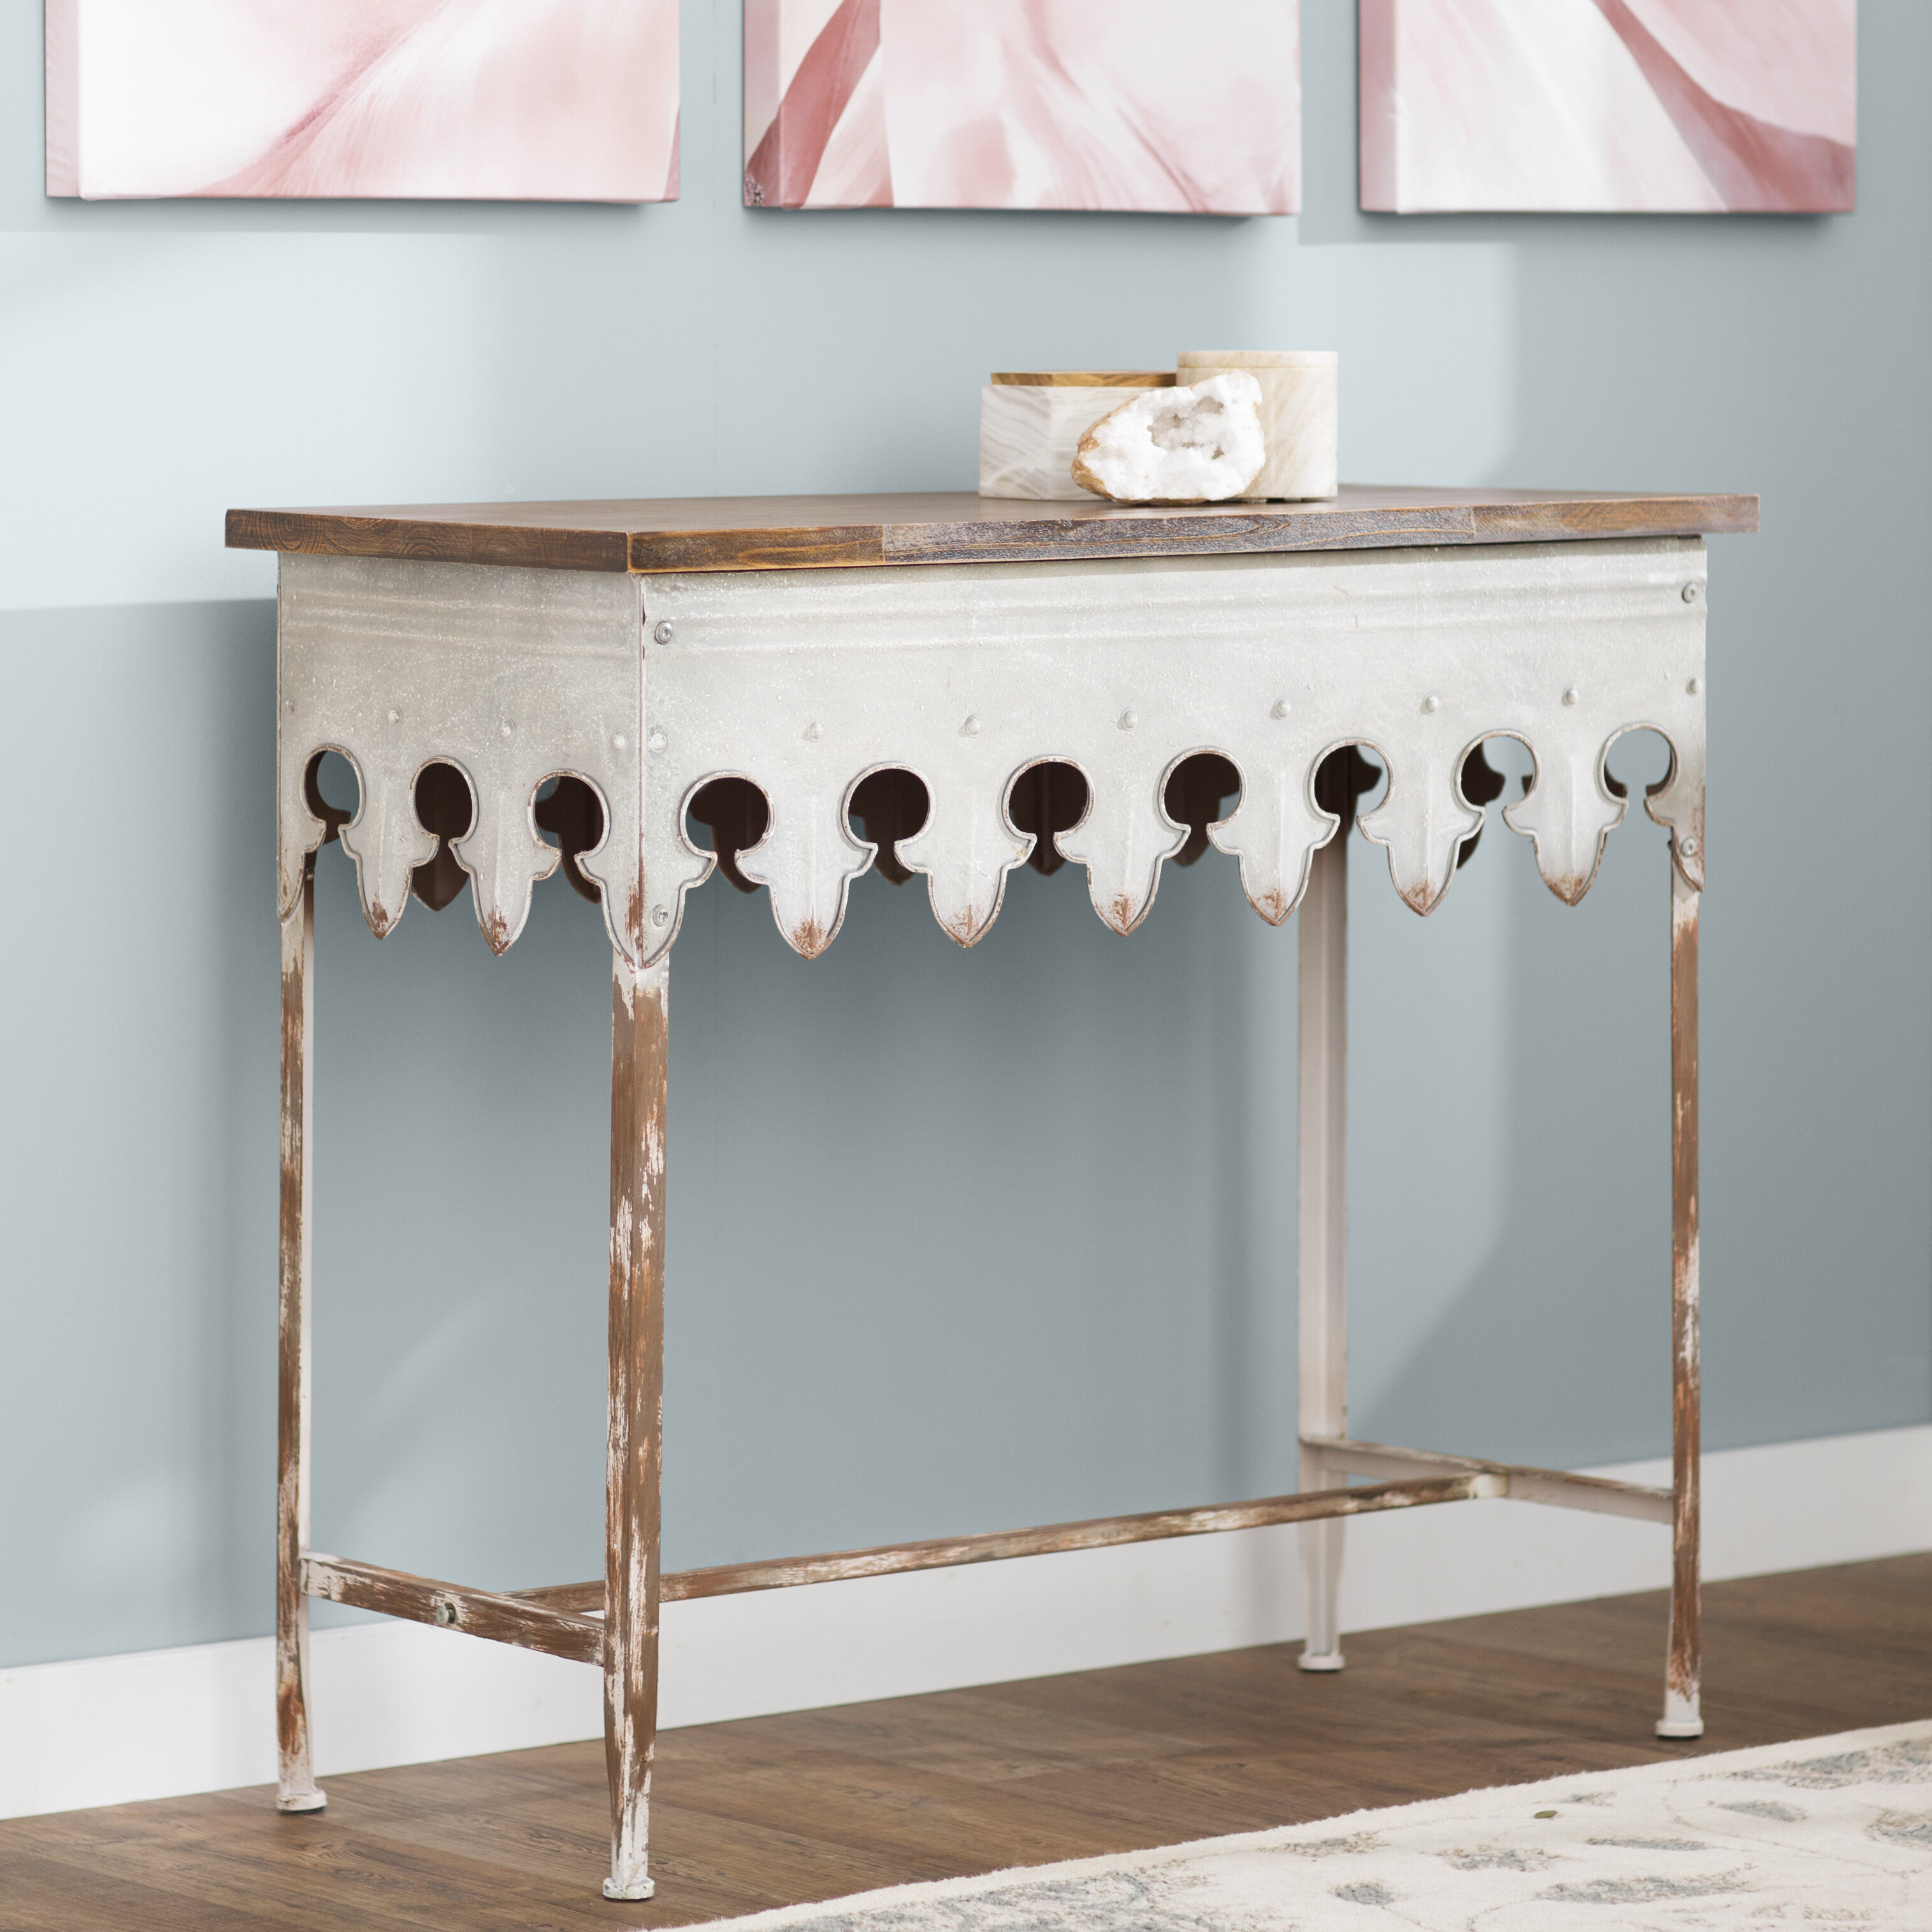 36 high console table